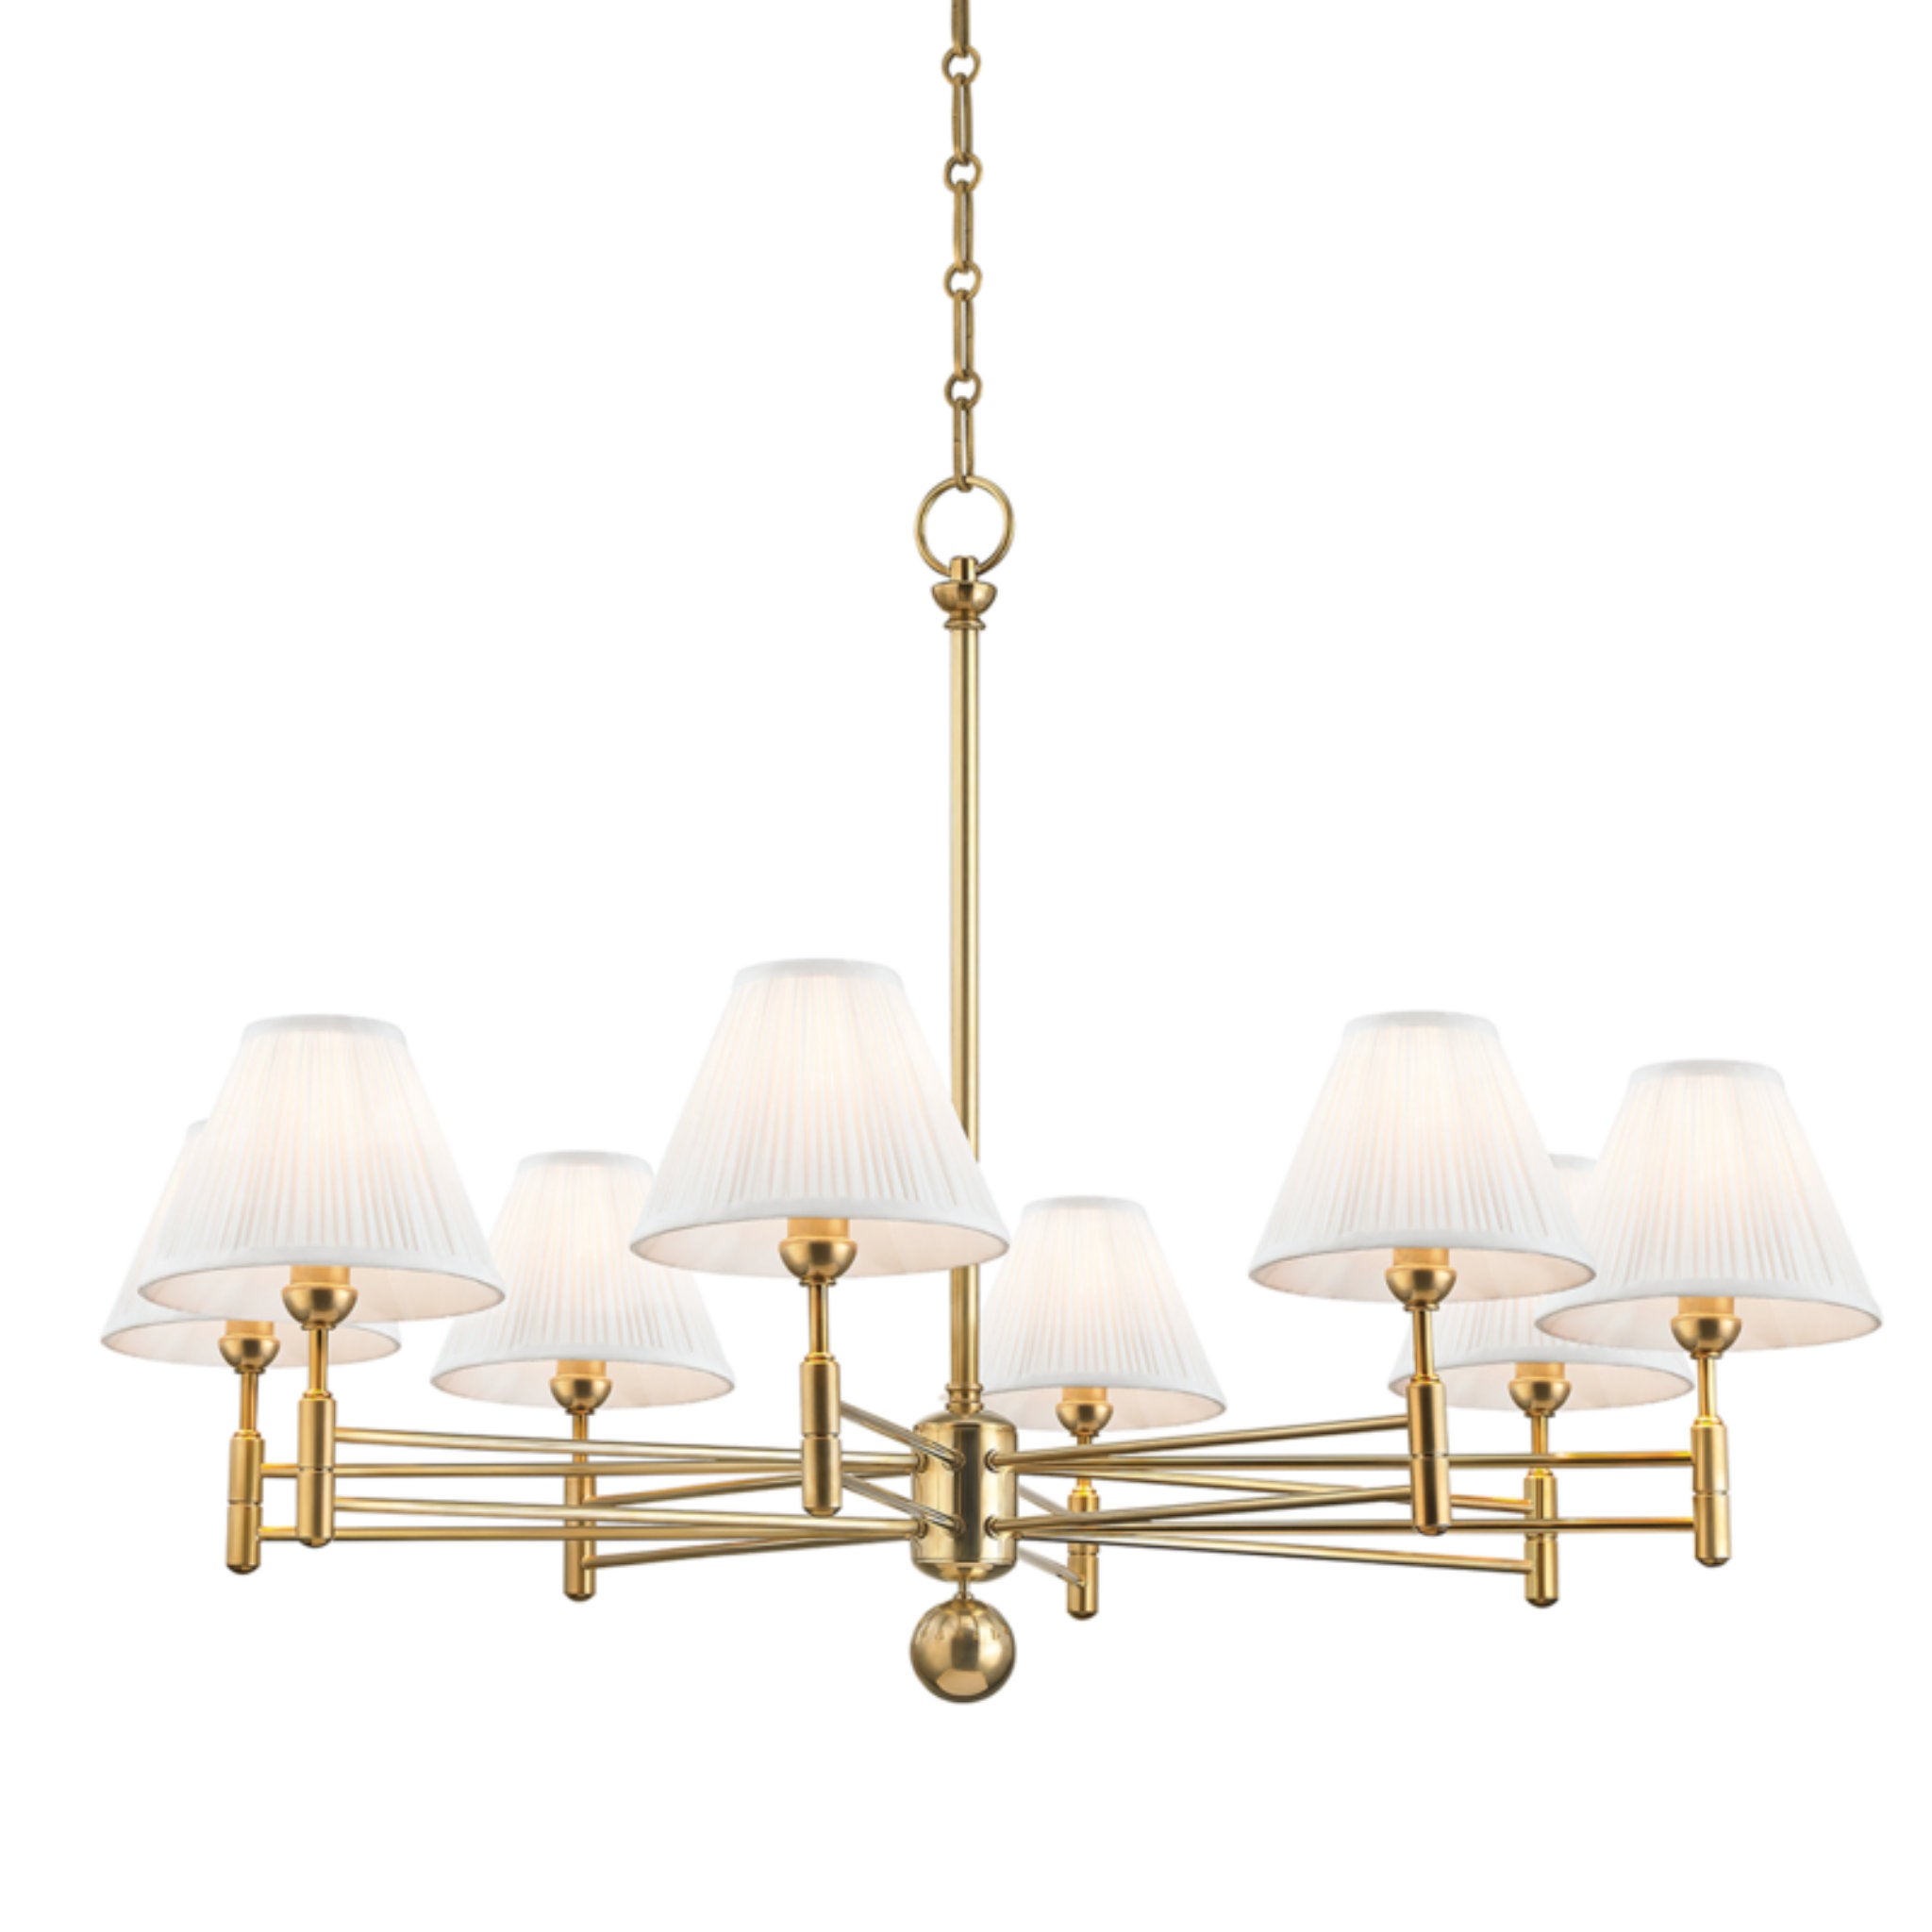 Classic No.1 8 Light Chandelier in Aged Brass by Mark D. Sikes